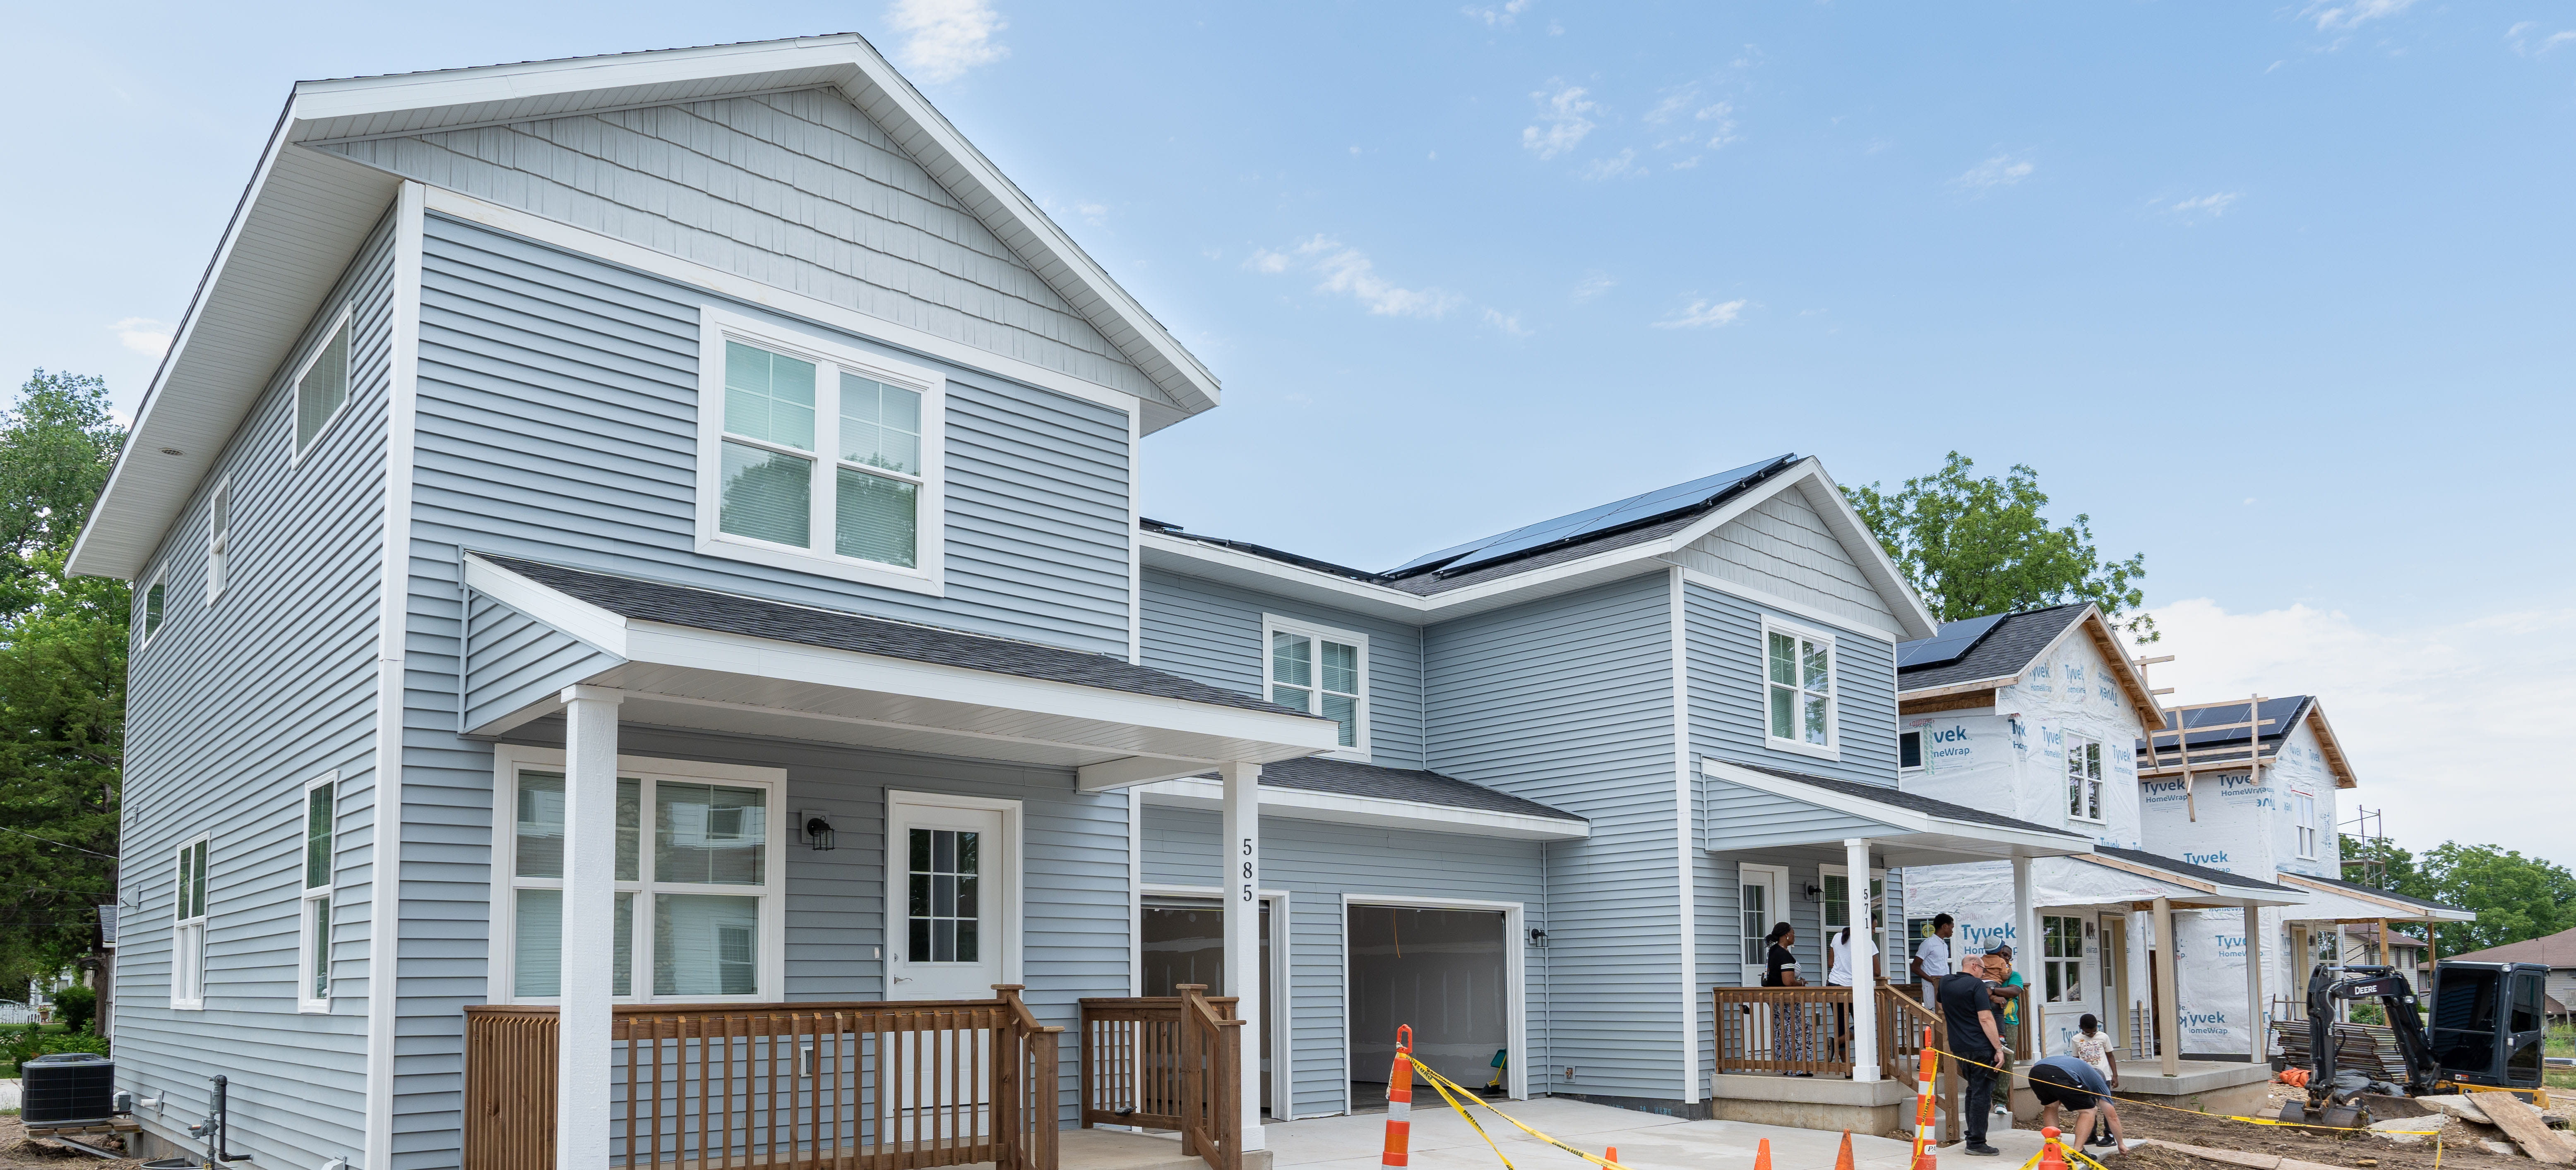 Exterior of a newly built twin home